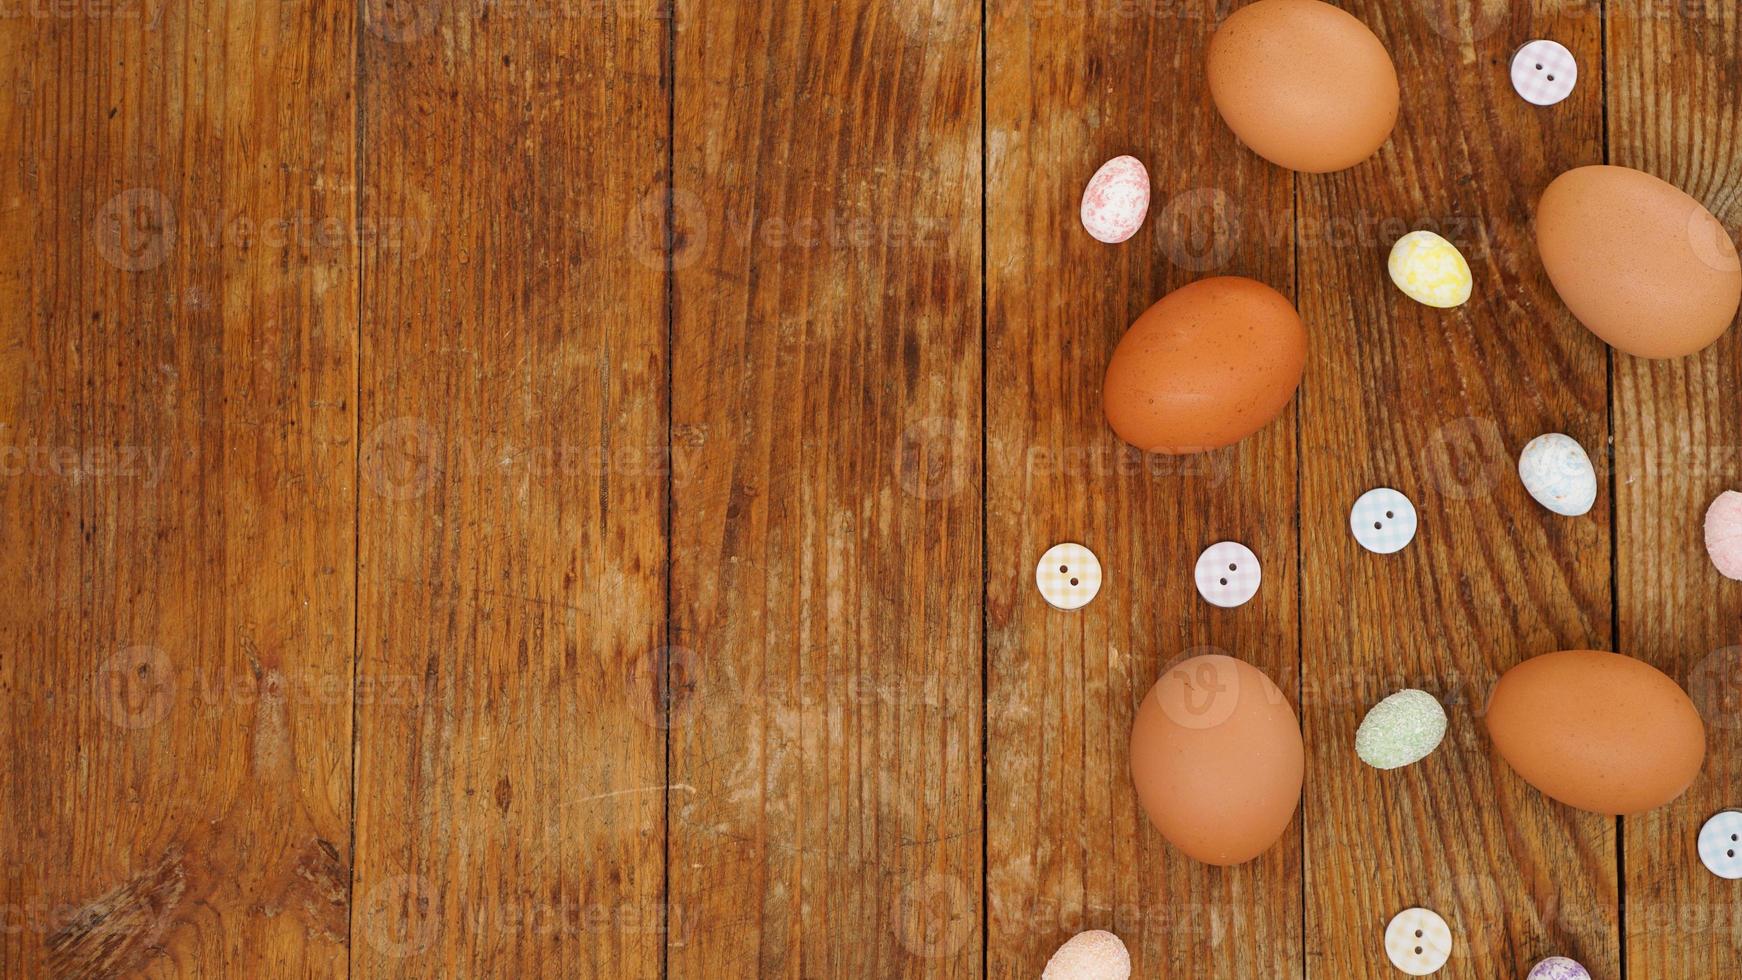 Eggs on a wooden rustic background with copy space for text. photo